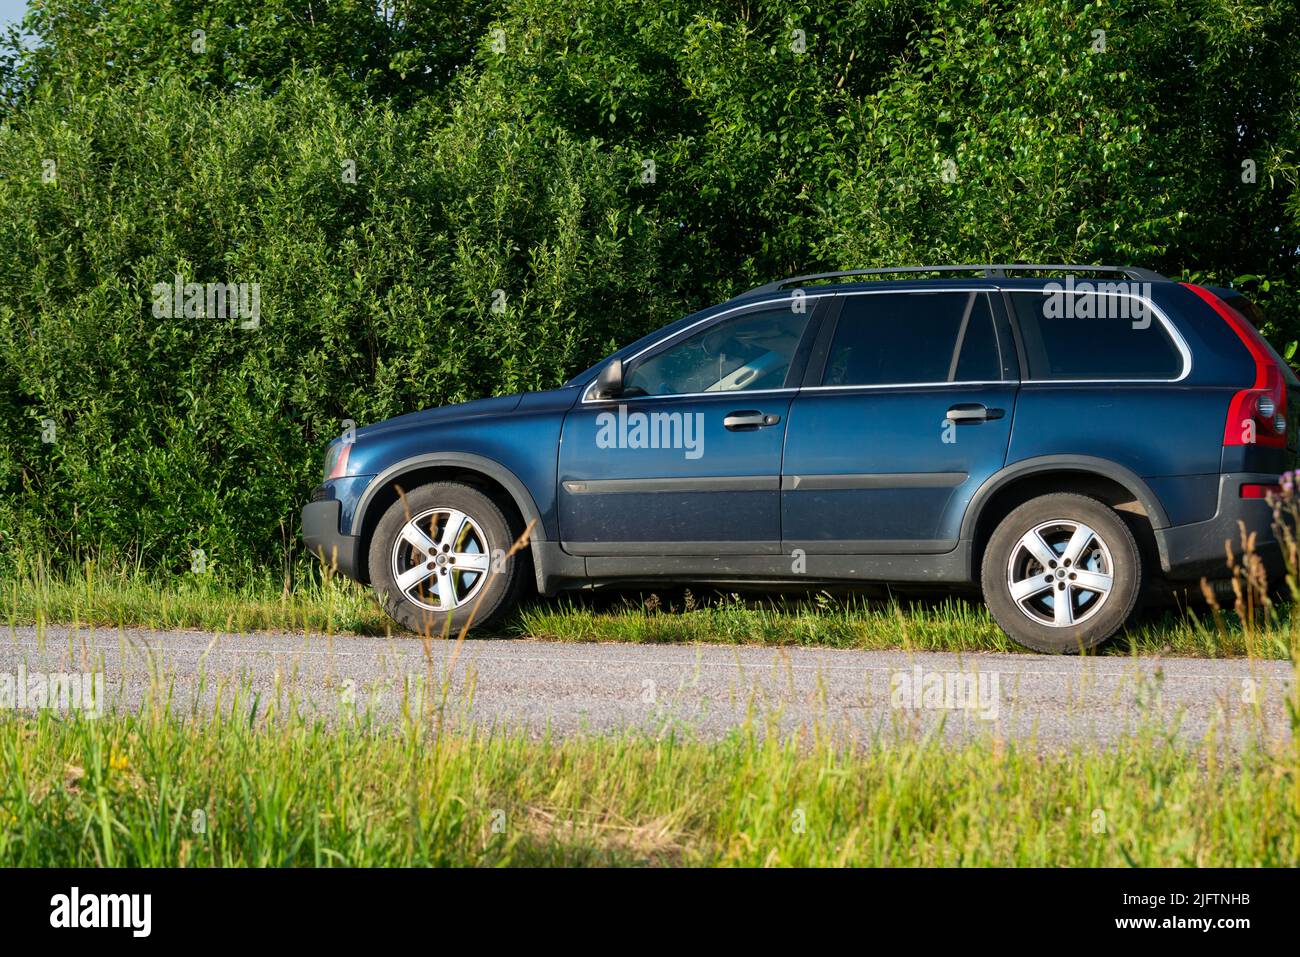 SUV on the side of a country road next to green bushes in green grass illuminated by warm summer sunset light. Stock Photo